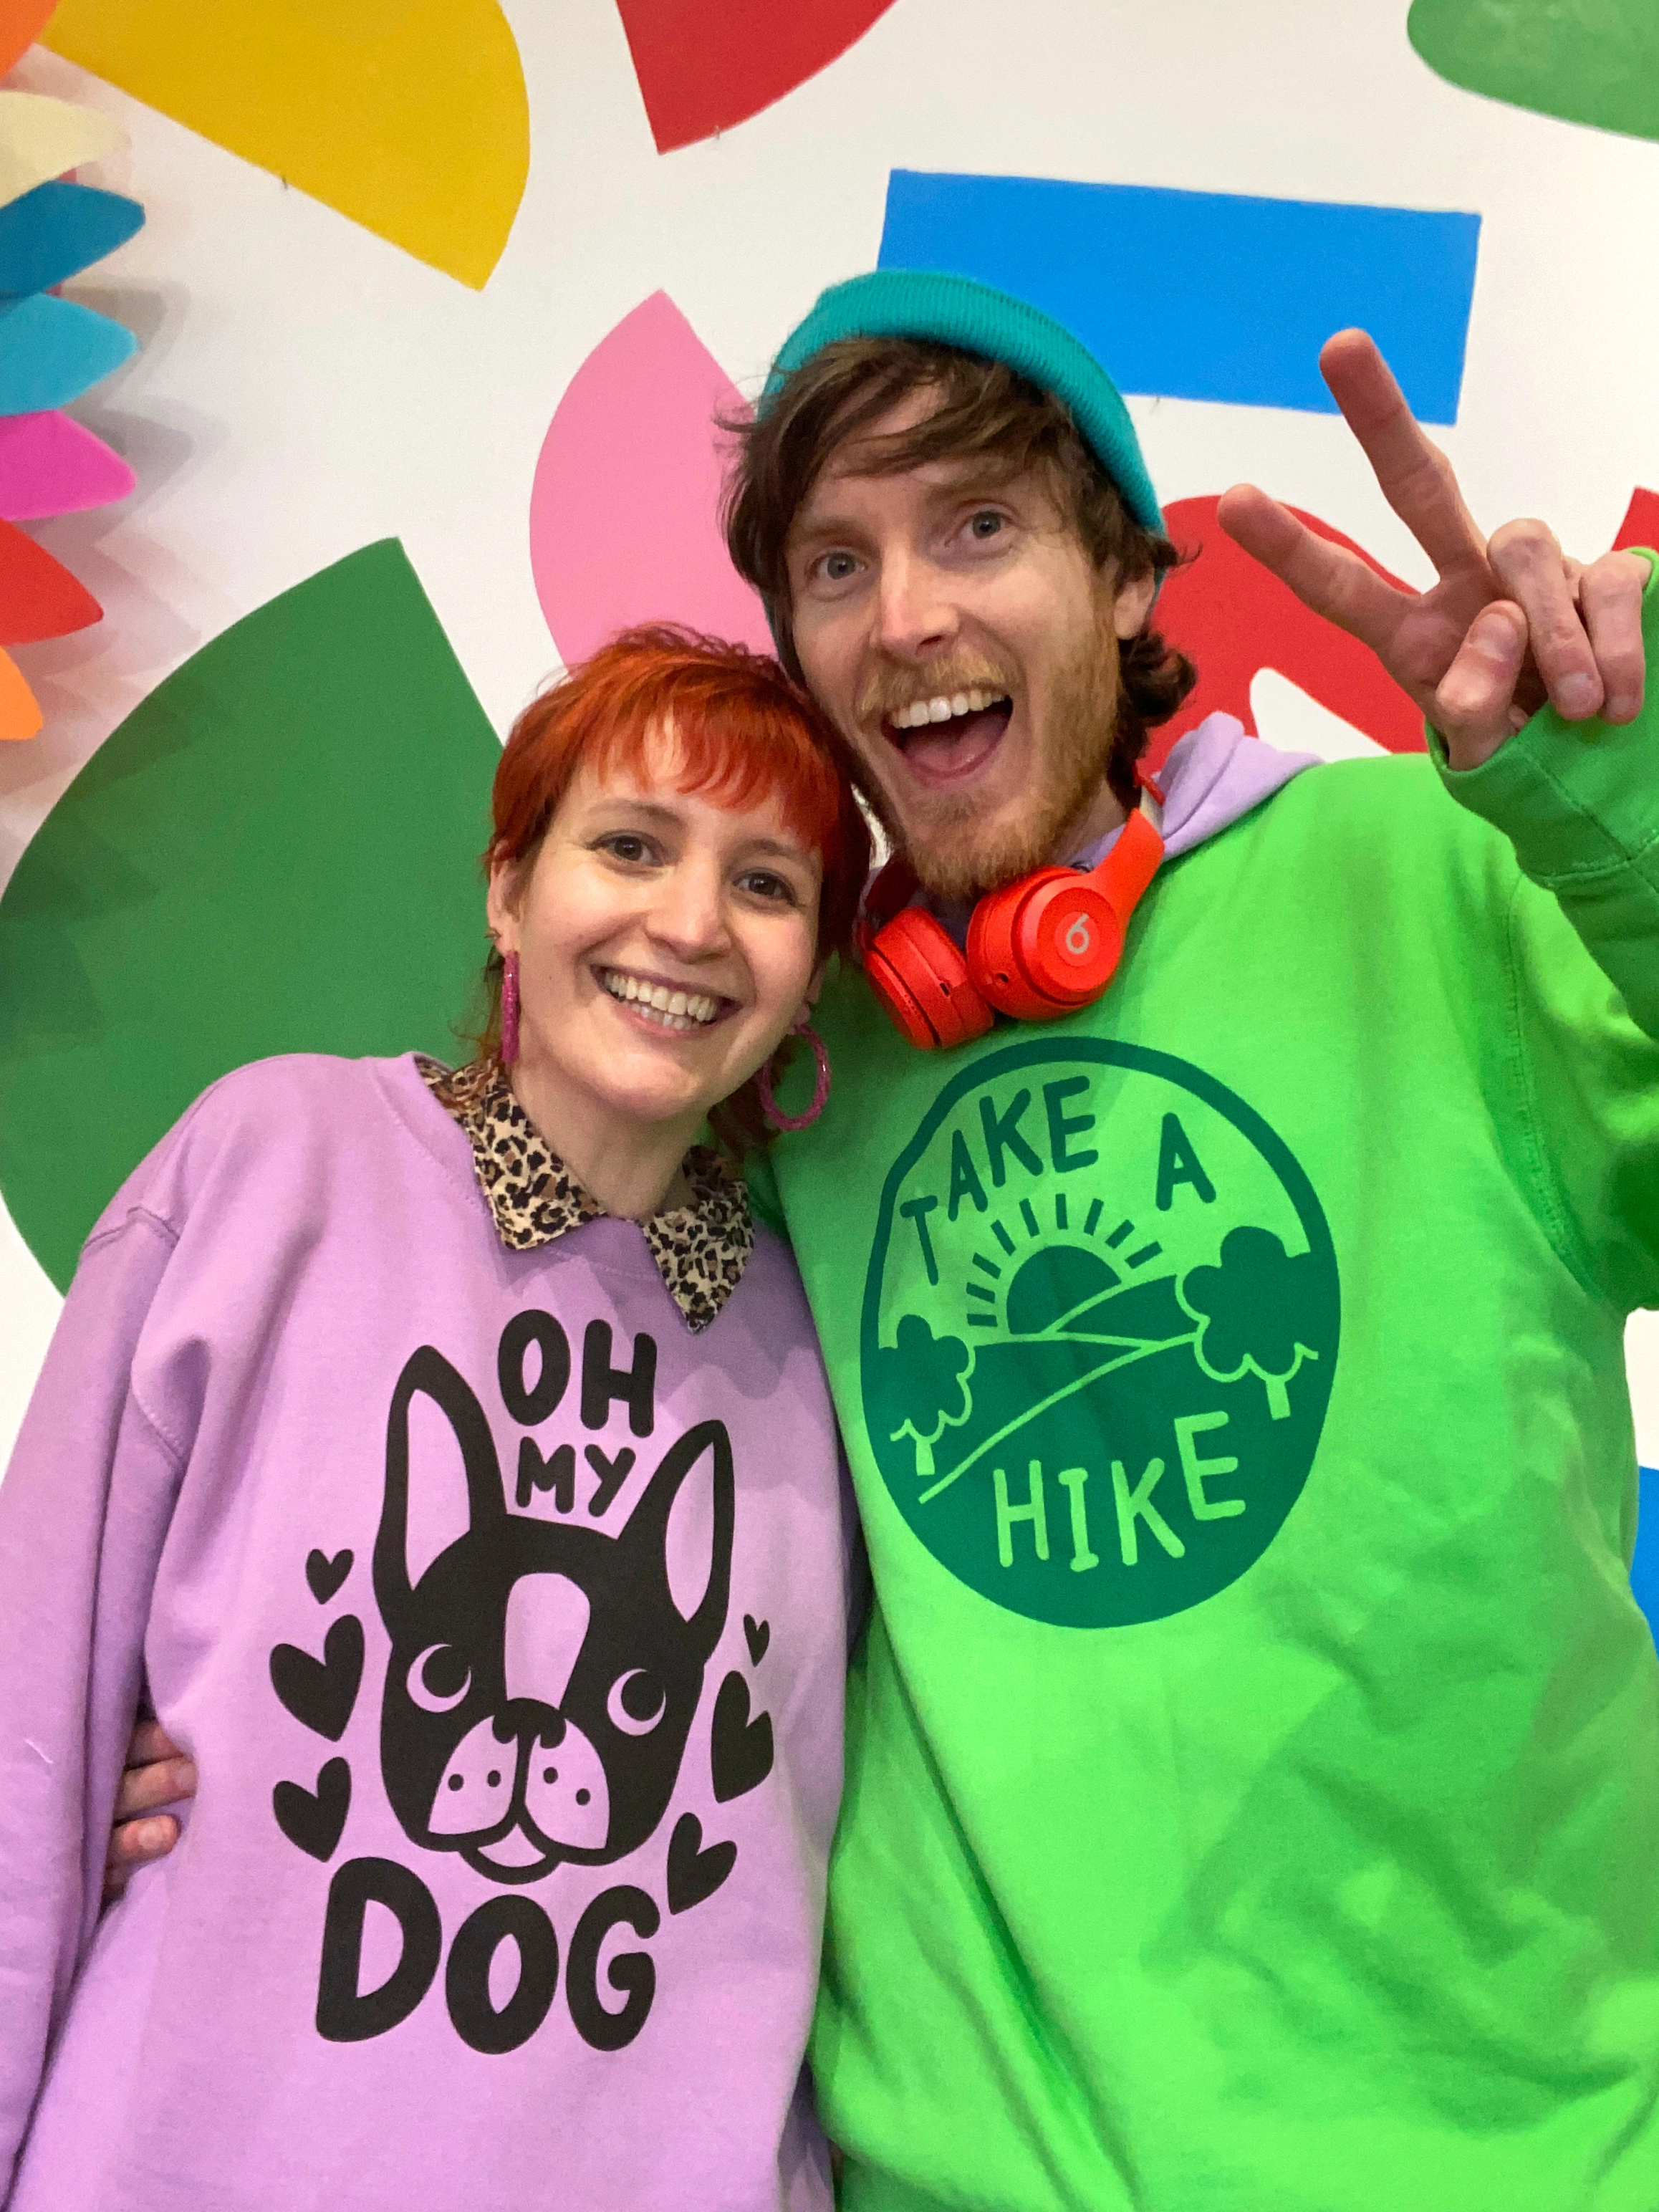 Ali and Jam, the founders of hello DODO Kids, a white woman and white man in their 30's stand against a colourful wall smiling at the camera. They both wear colourful screen printed sweatshirts.